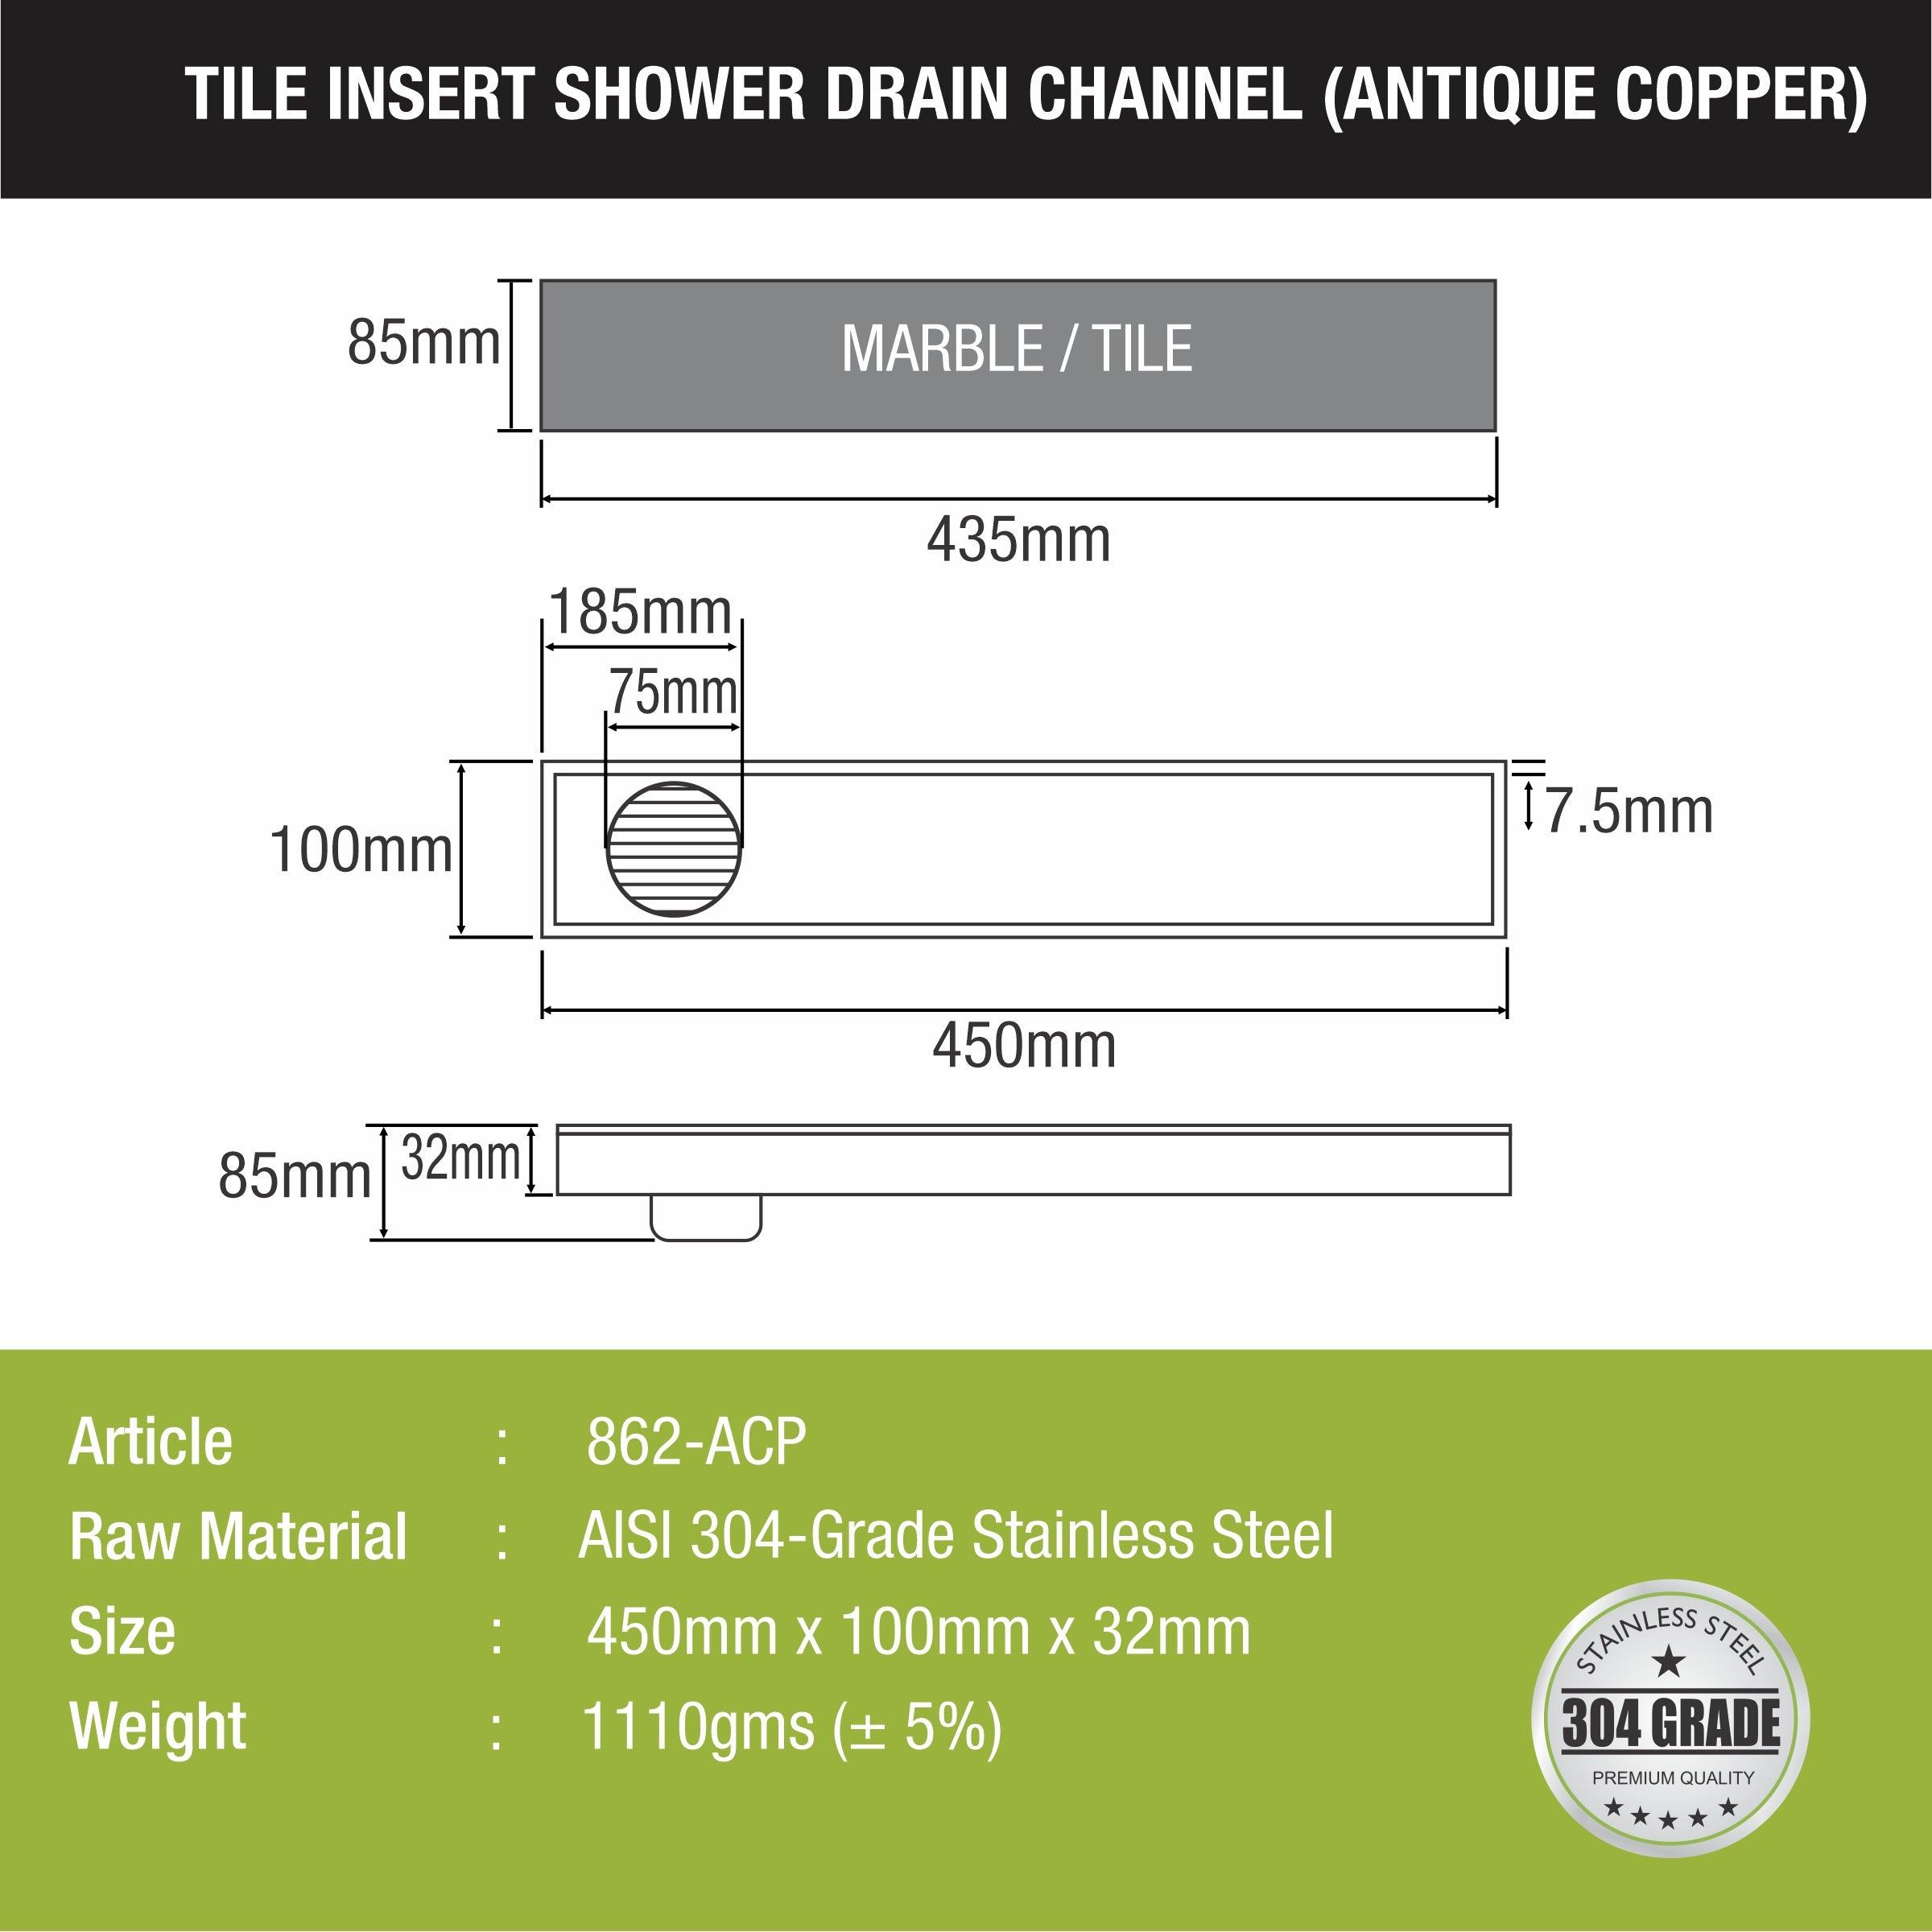 Tile Insert Shower Drain Channel - Antique Copper (18 x 4 Inches) sizes and dimensions